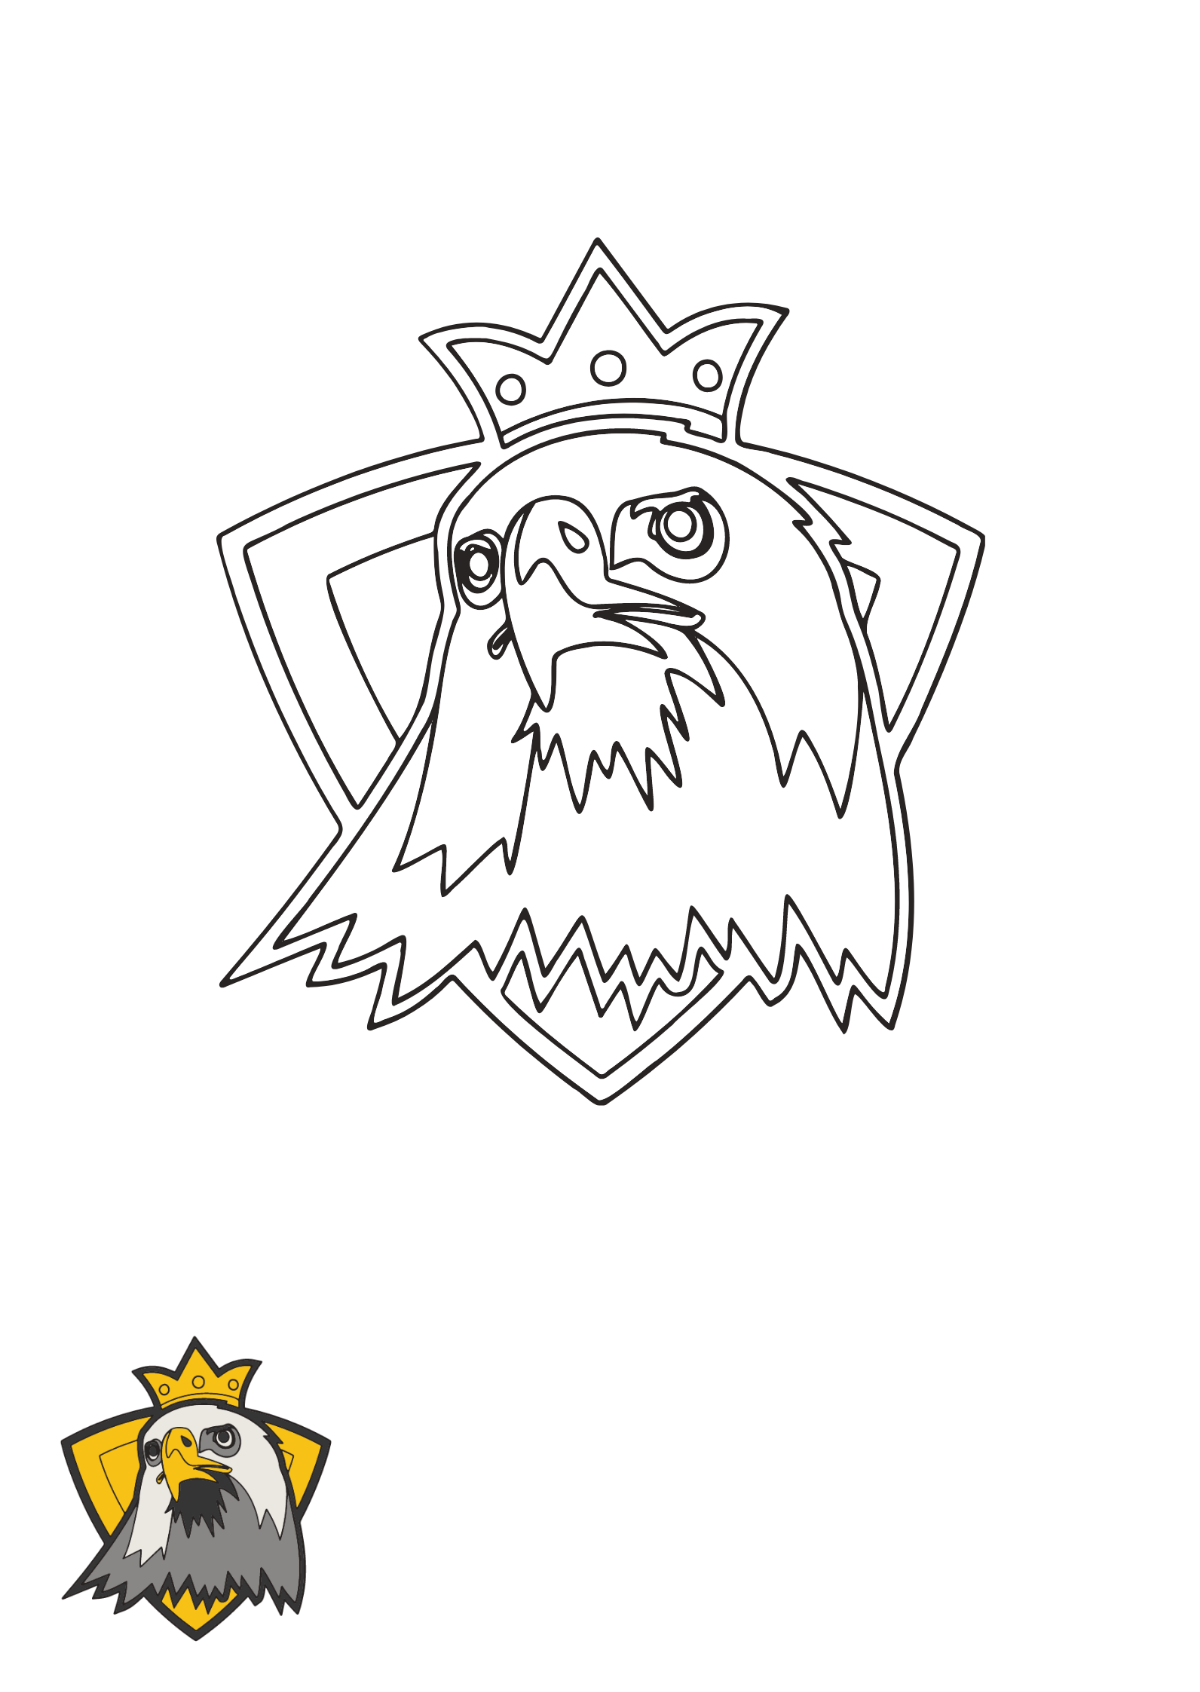 King Eagle coloring page Template